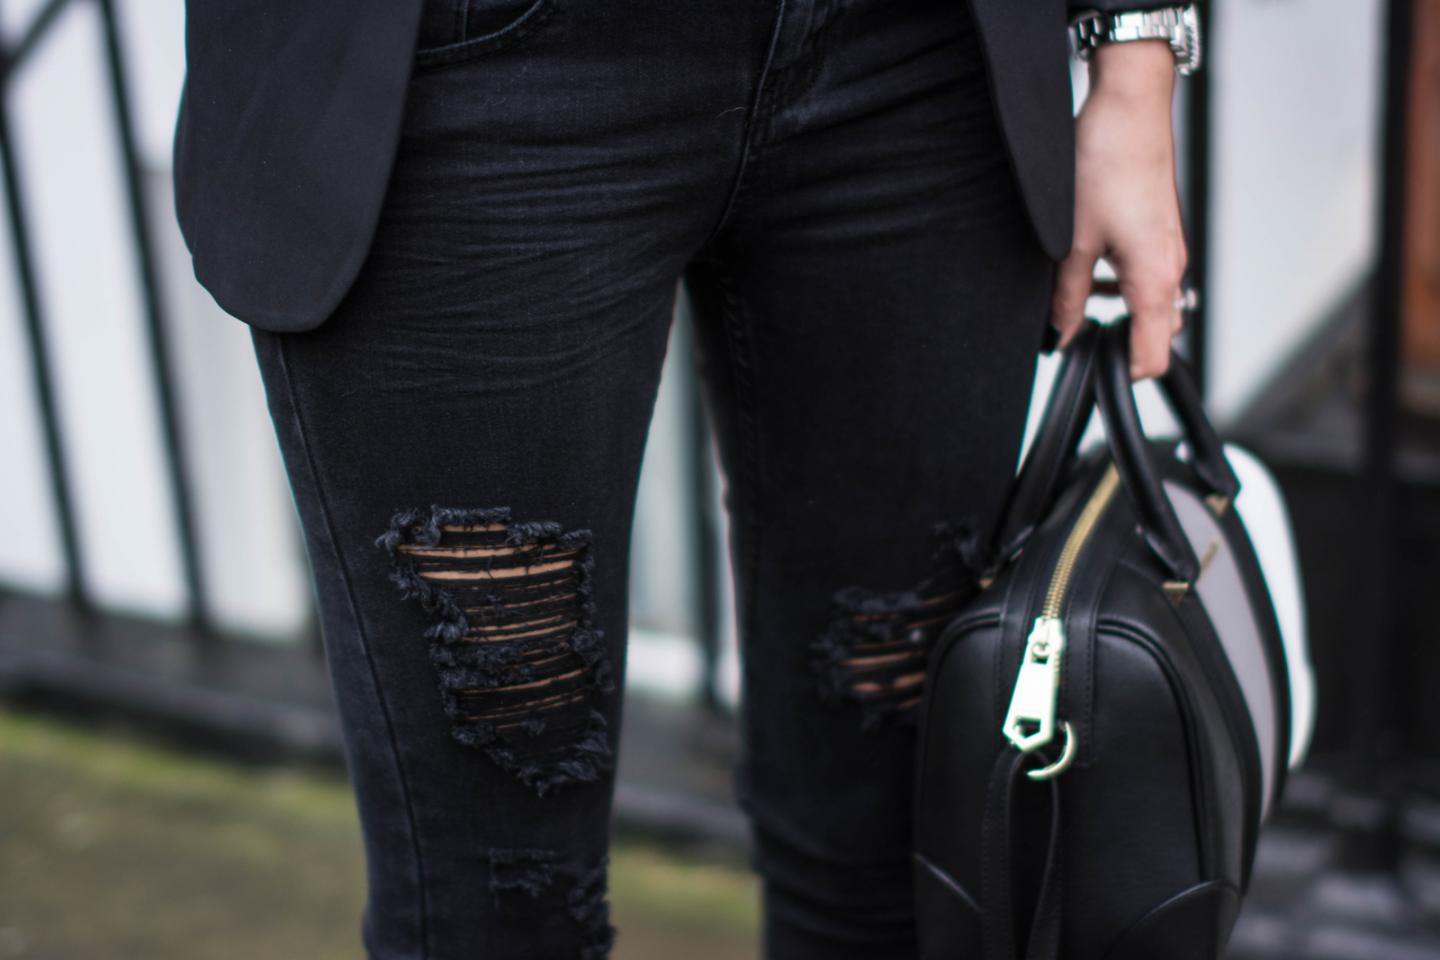 EJSTYLE - New Look ripped parisian black skinny jeans, Givenchy Lucrezia mini bag, monochrome OOTD, blogger